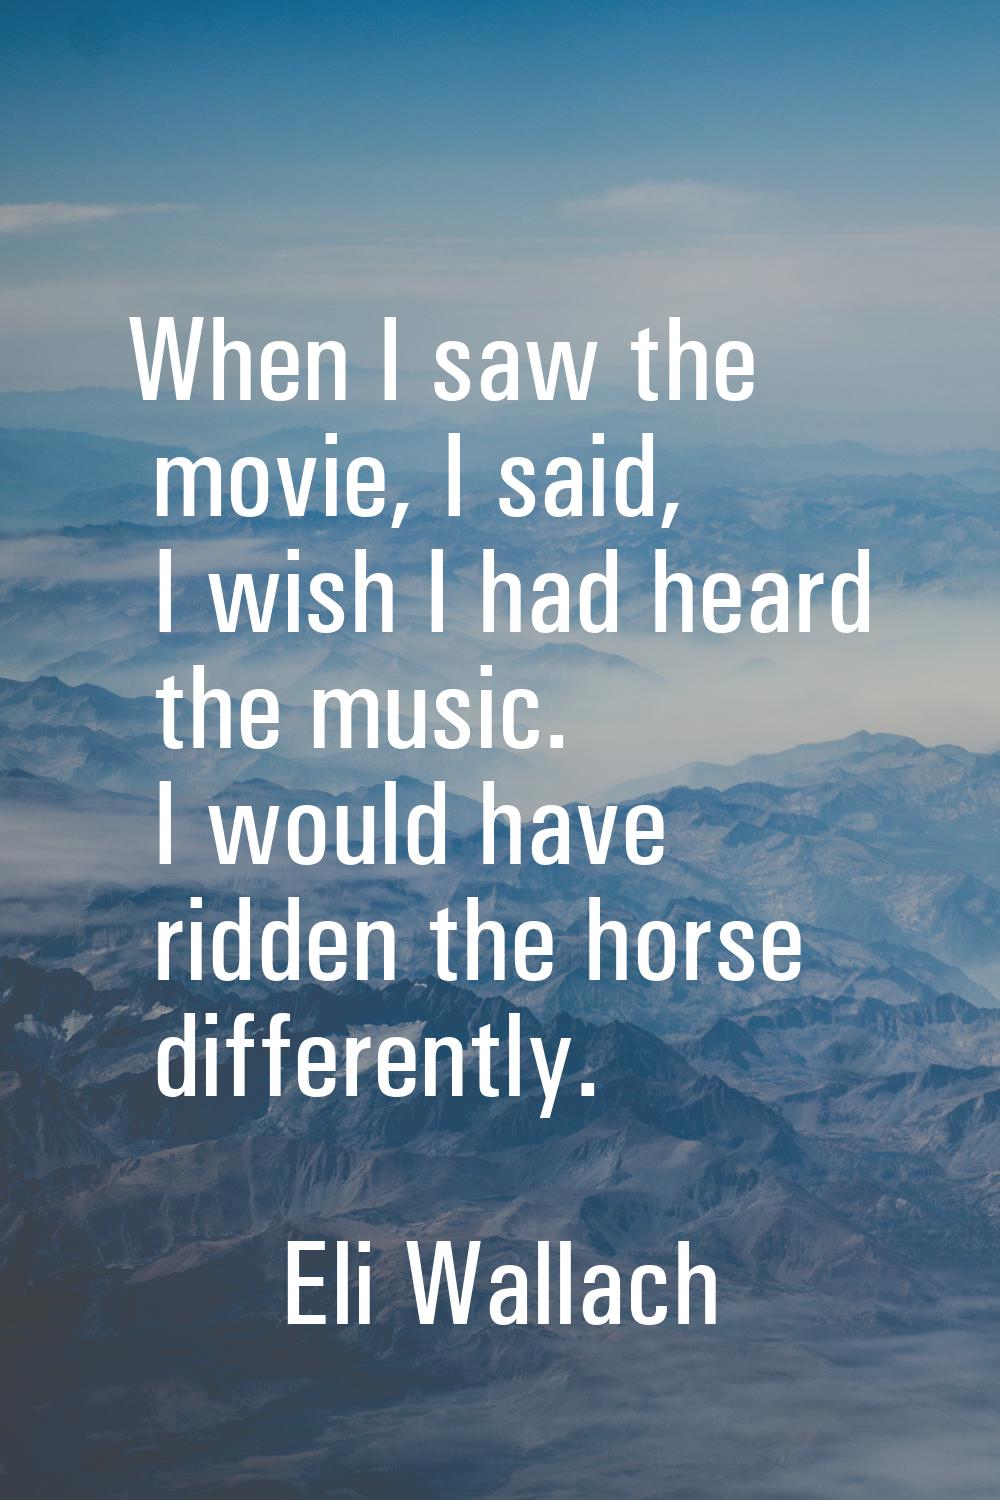 When I saw the movie, I said, I wish I had heard the music. I would have ridden the horse different